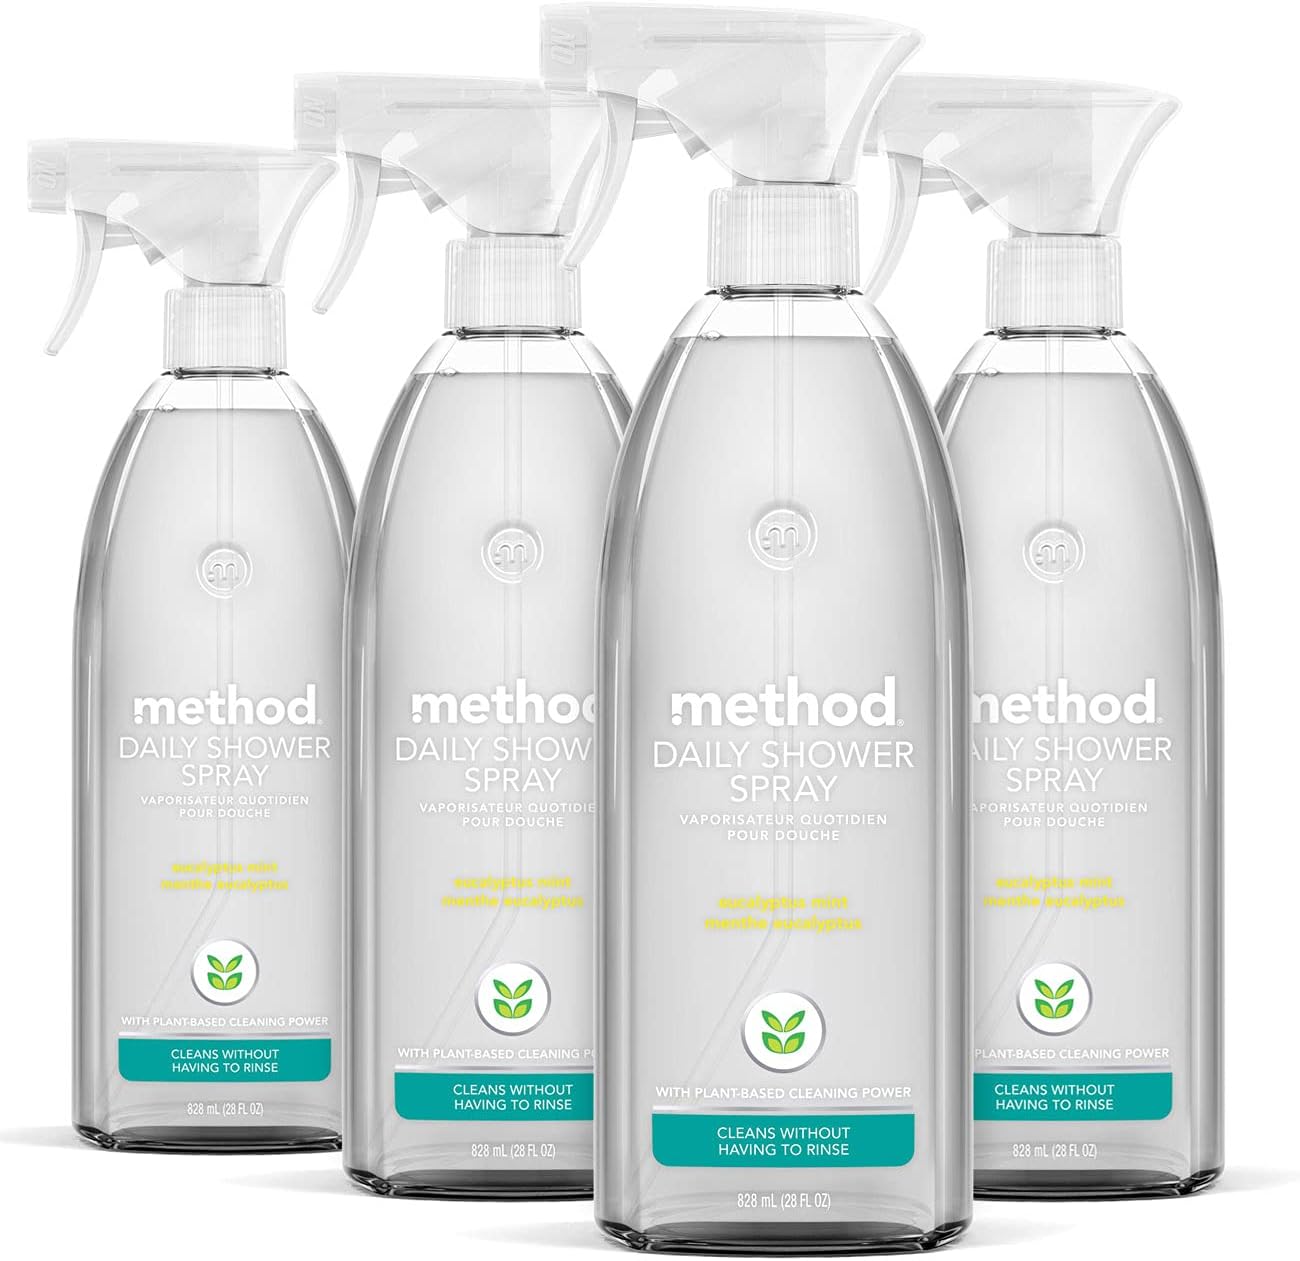 Method Daily Shower Cleaner Spray, Plant-Based & Biodegradable Formula, Spray and Walk Away, Eucalyptus Mint Scent, 28 Fl Oz, (Pack of 4), Packaging May Vary